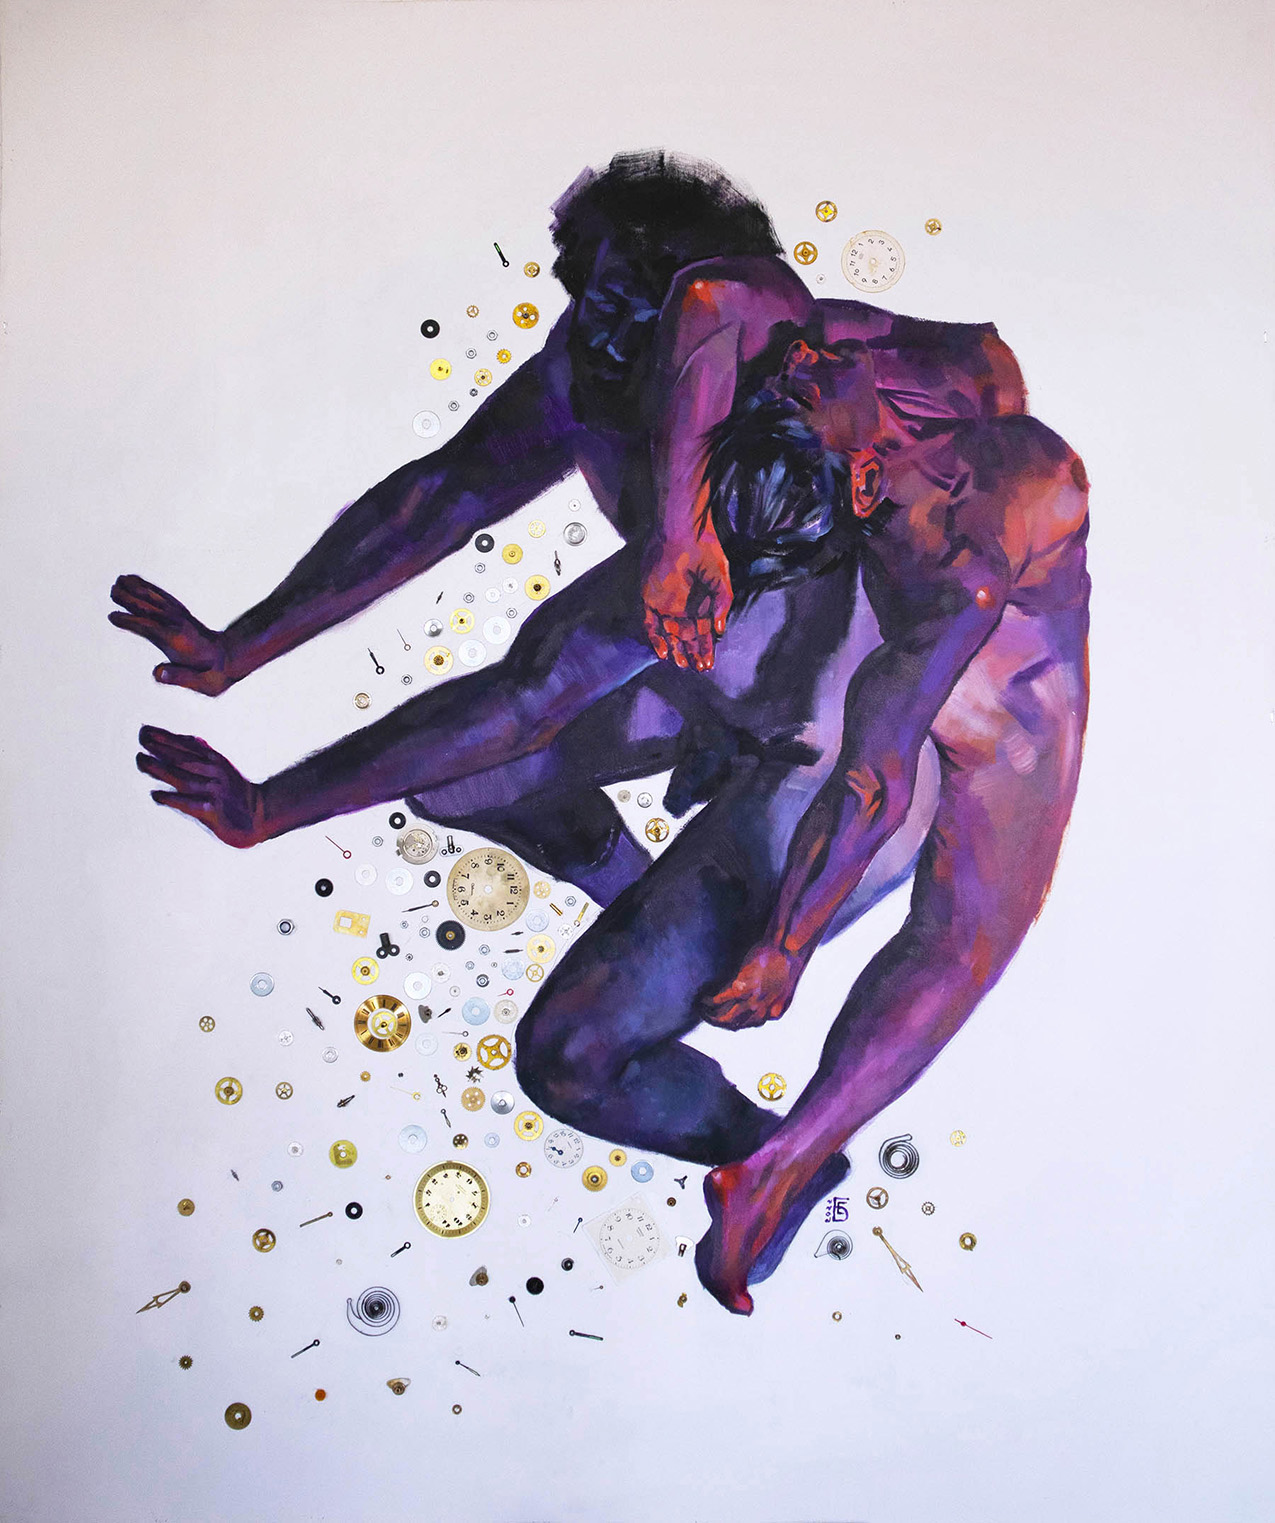 painting of purple/red nude bodies in motion on white background, surrounded by pieces of clocks